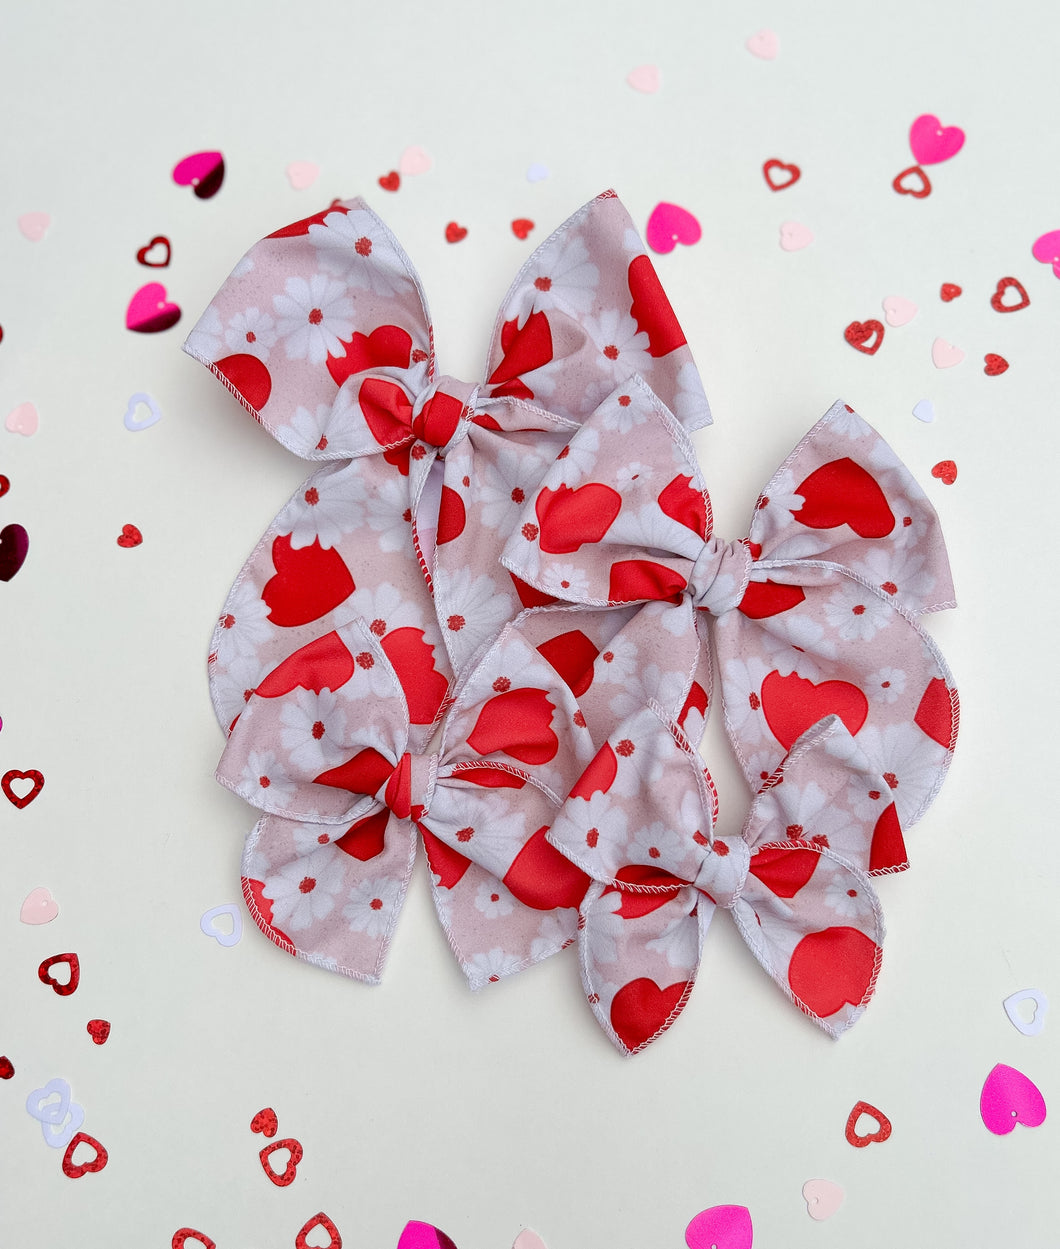 The Hearts + Flowers Wholesale Bow Preorder